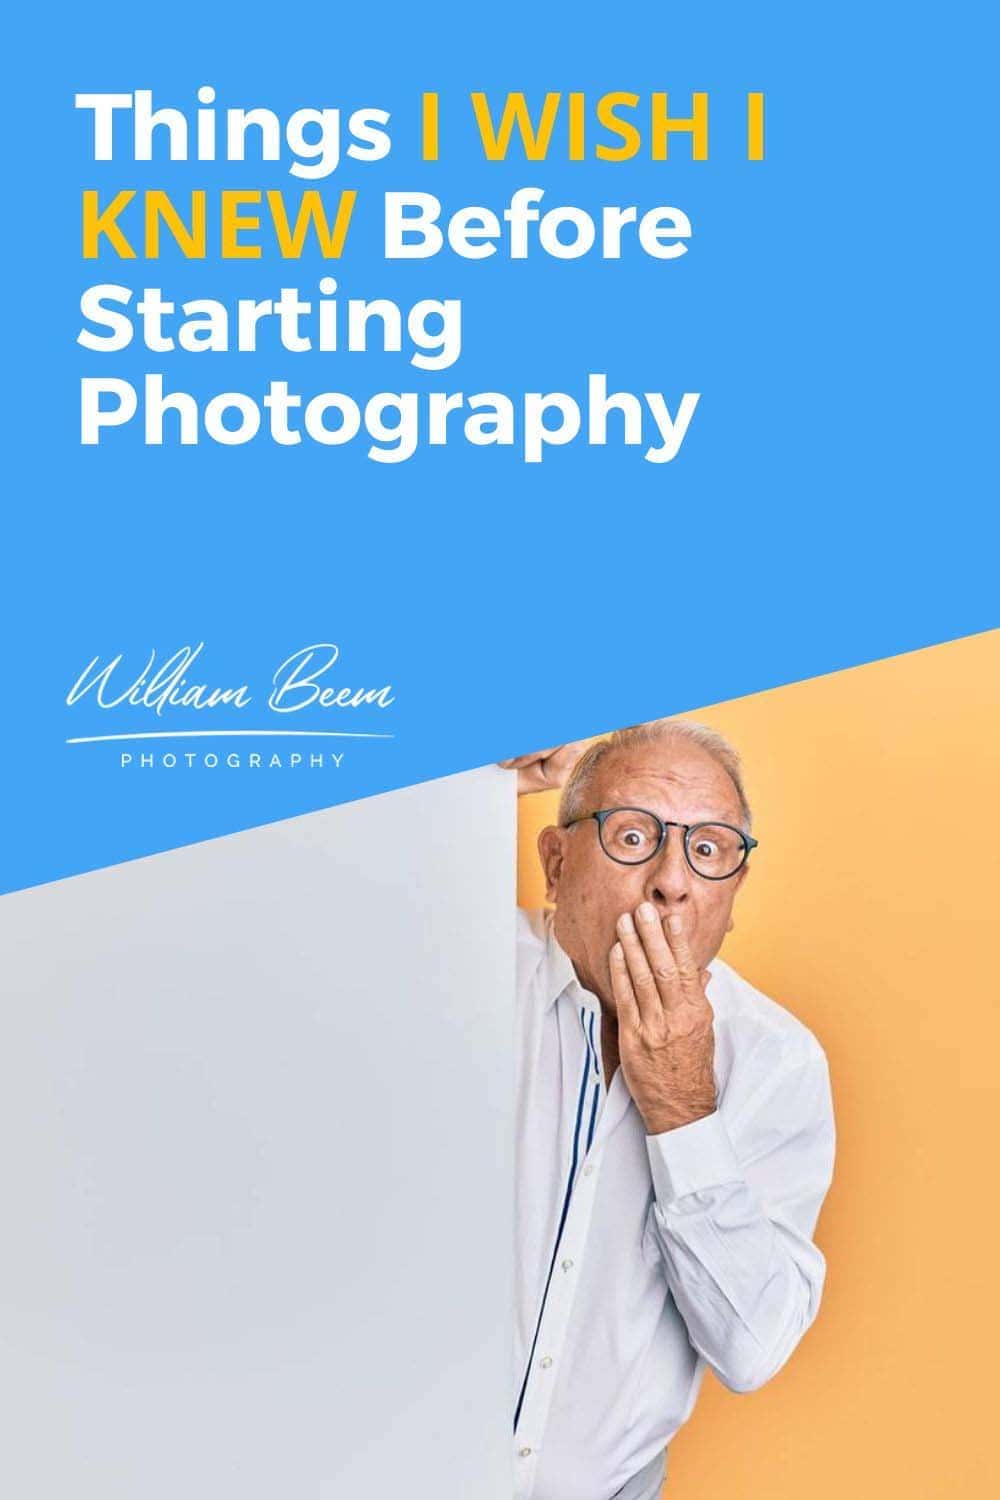 Things I Wish I Knew Before Starting Photography